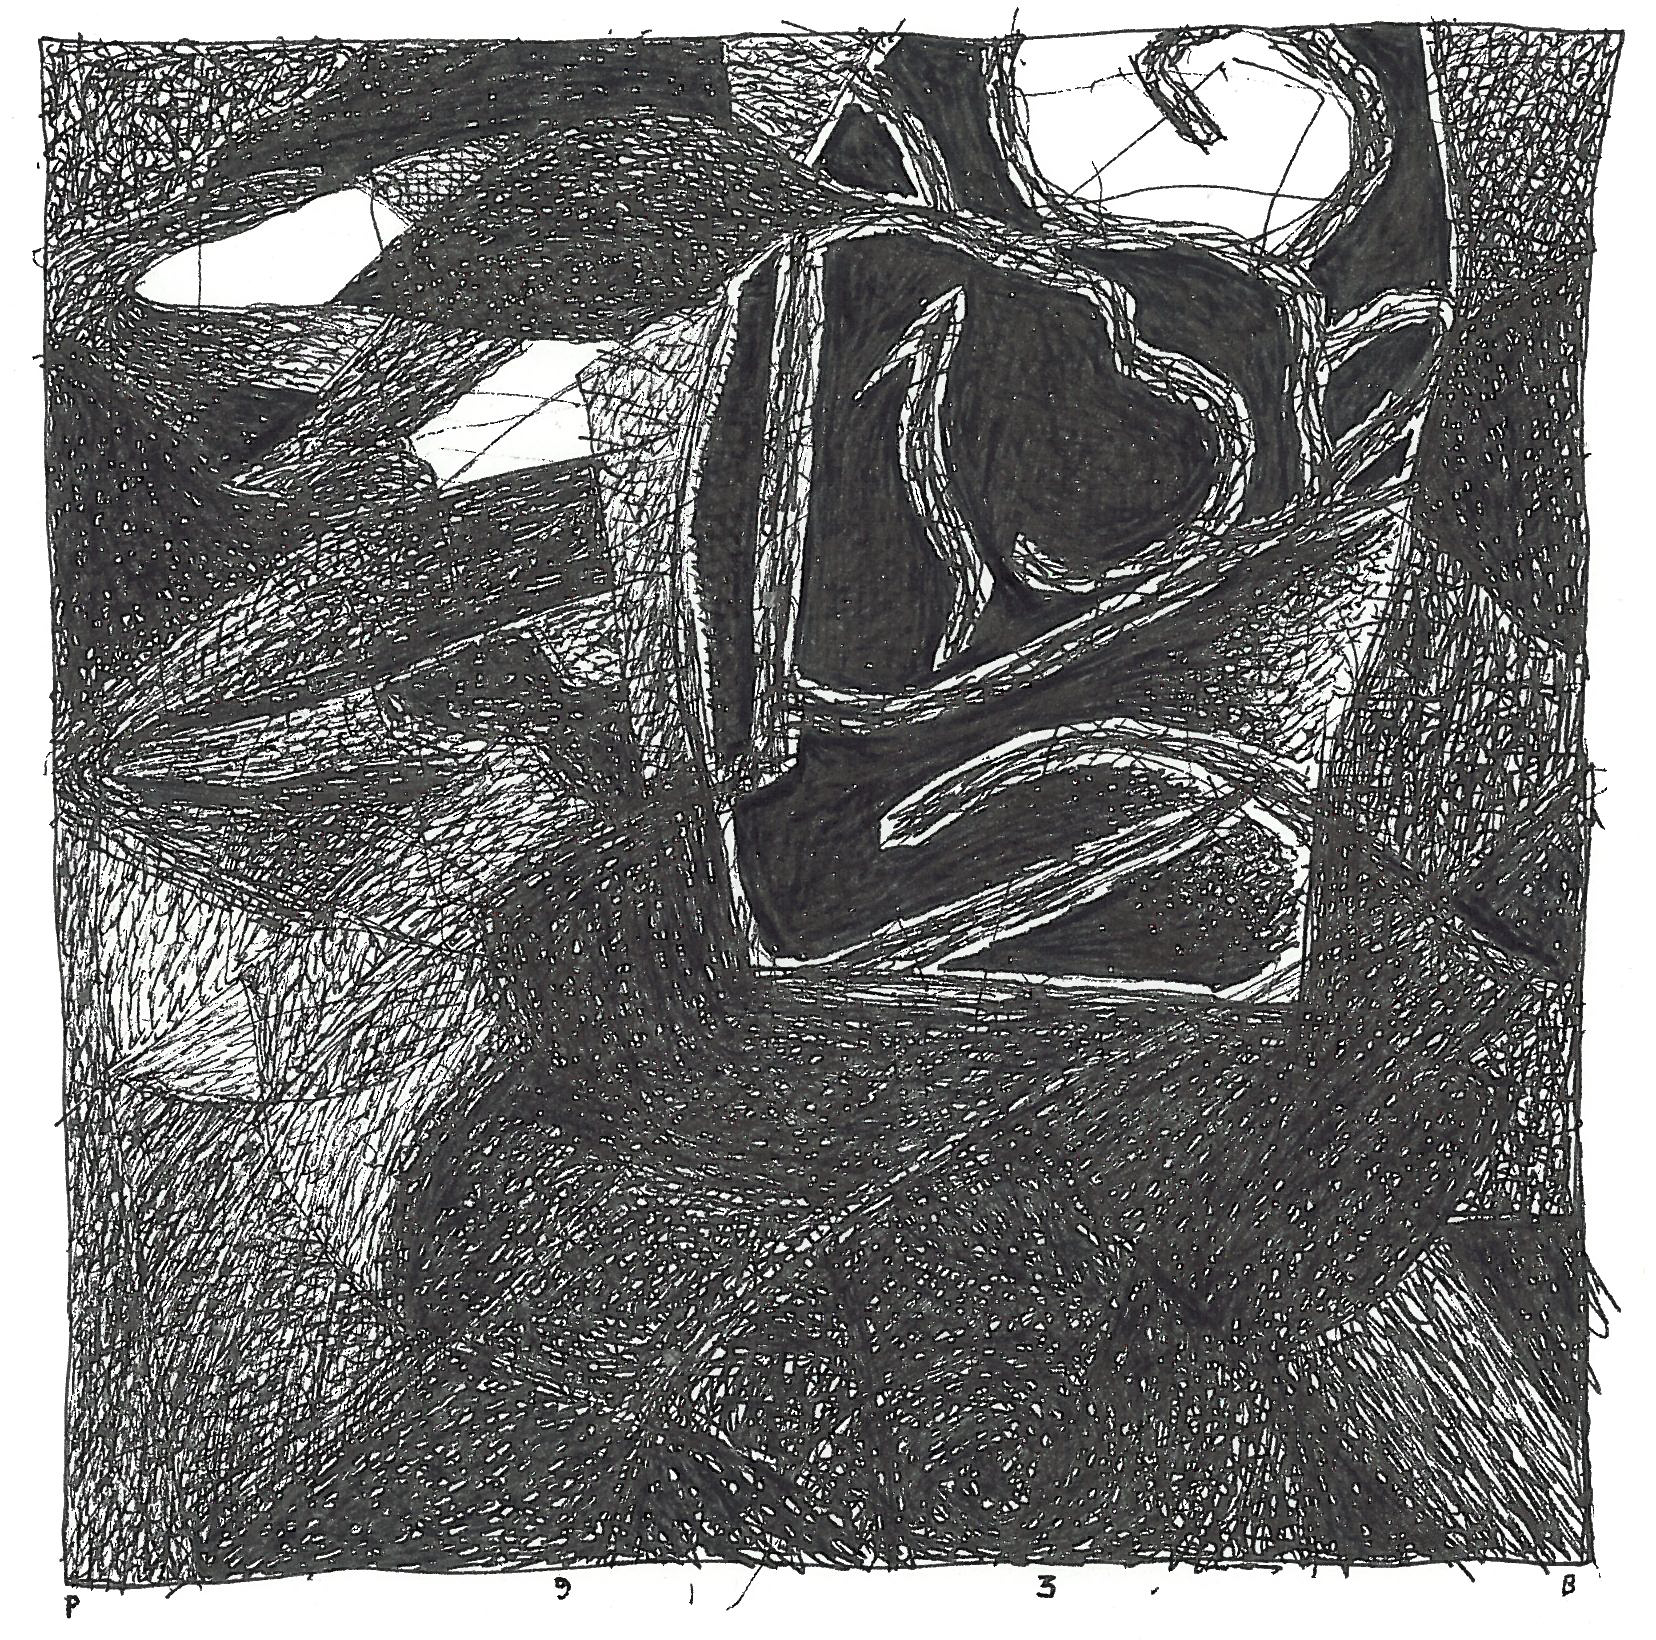  Pen and Ink - 5.25" x 8.25" - 2005 